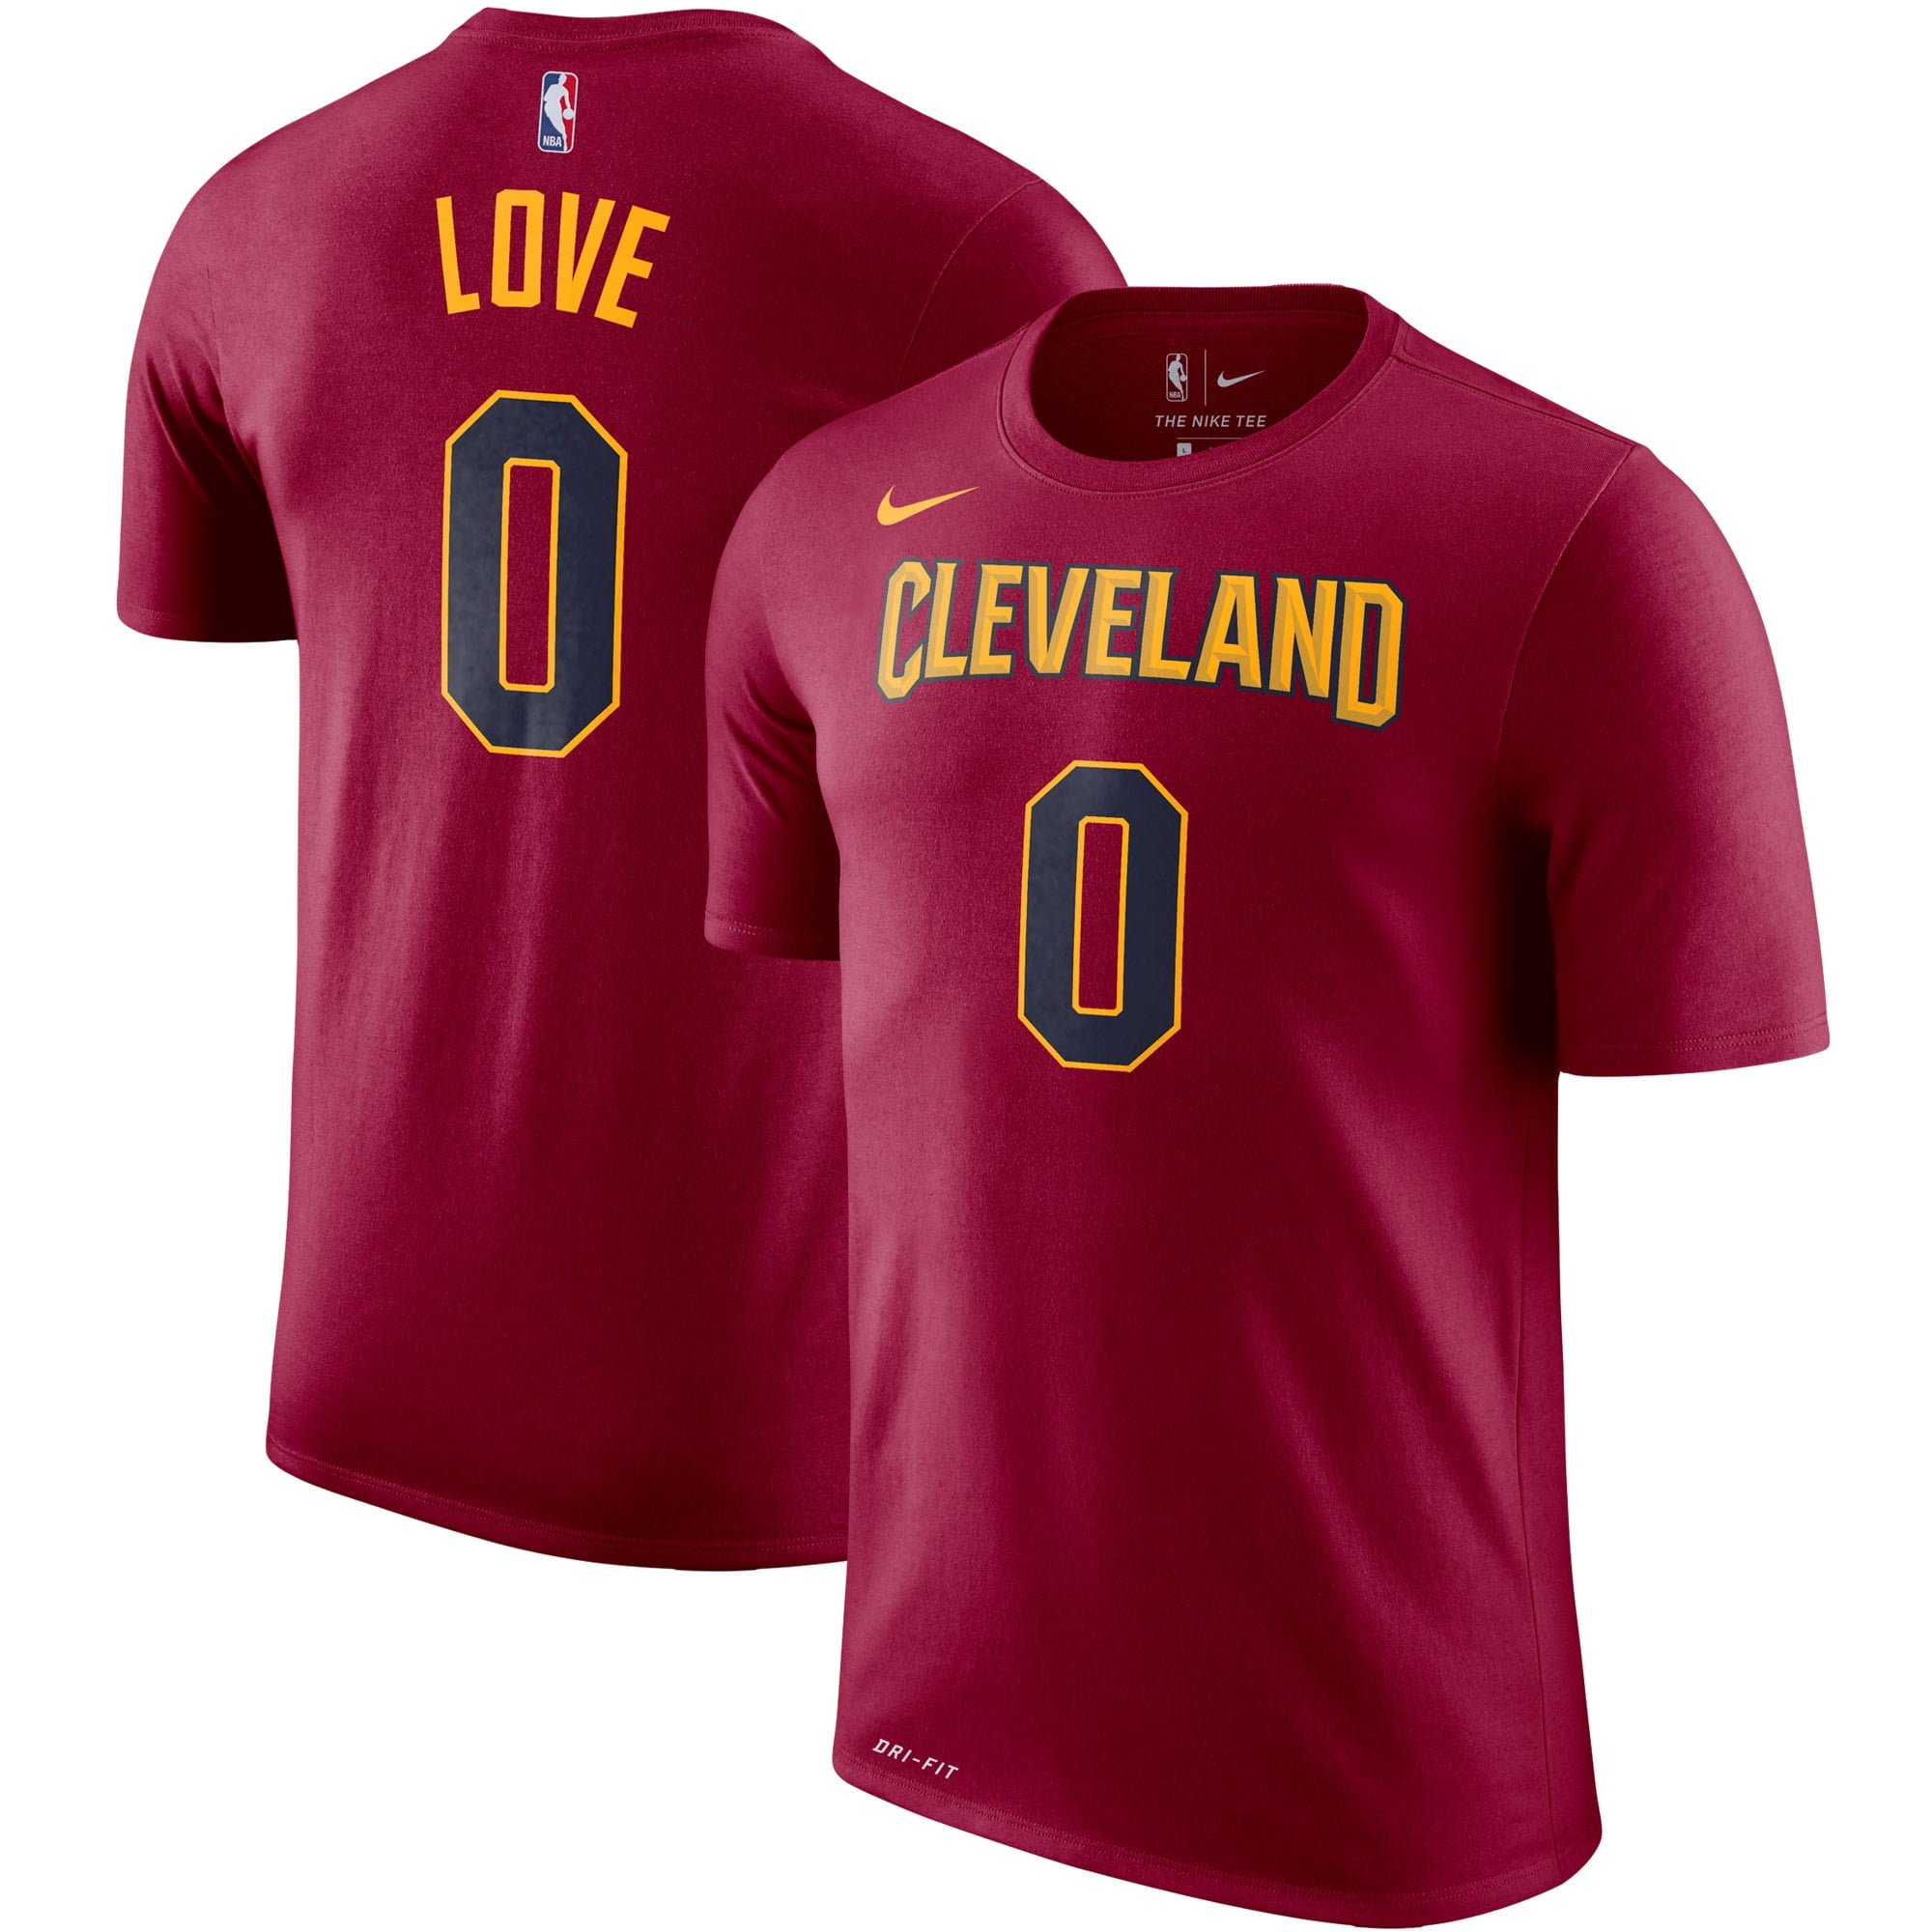 kevin love jersey number